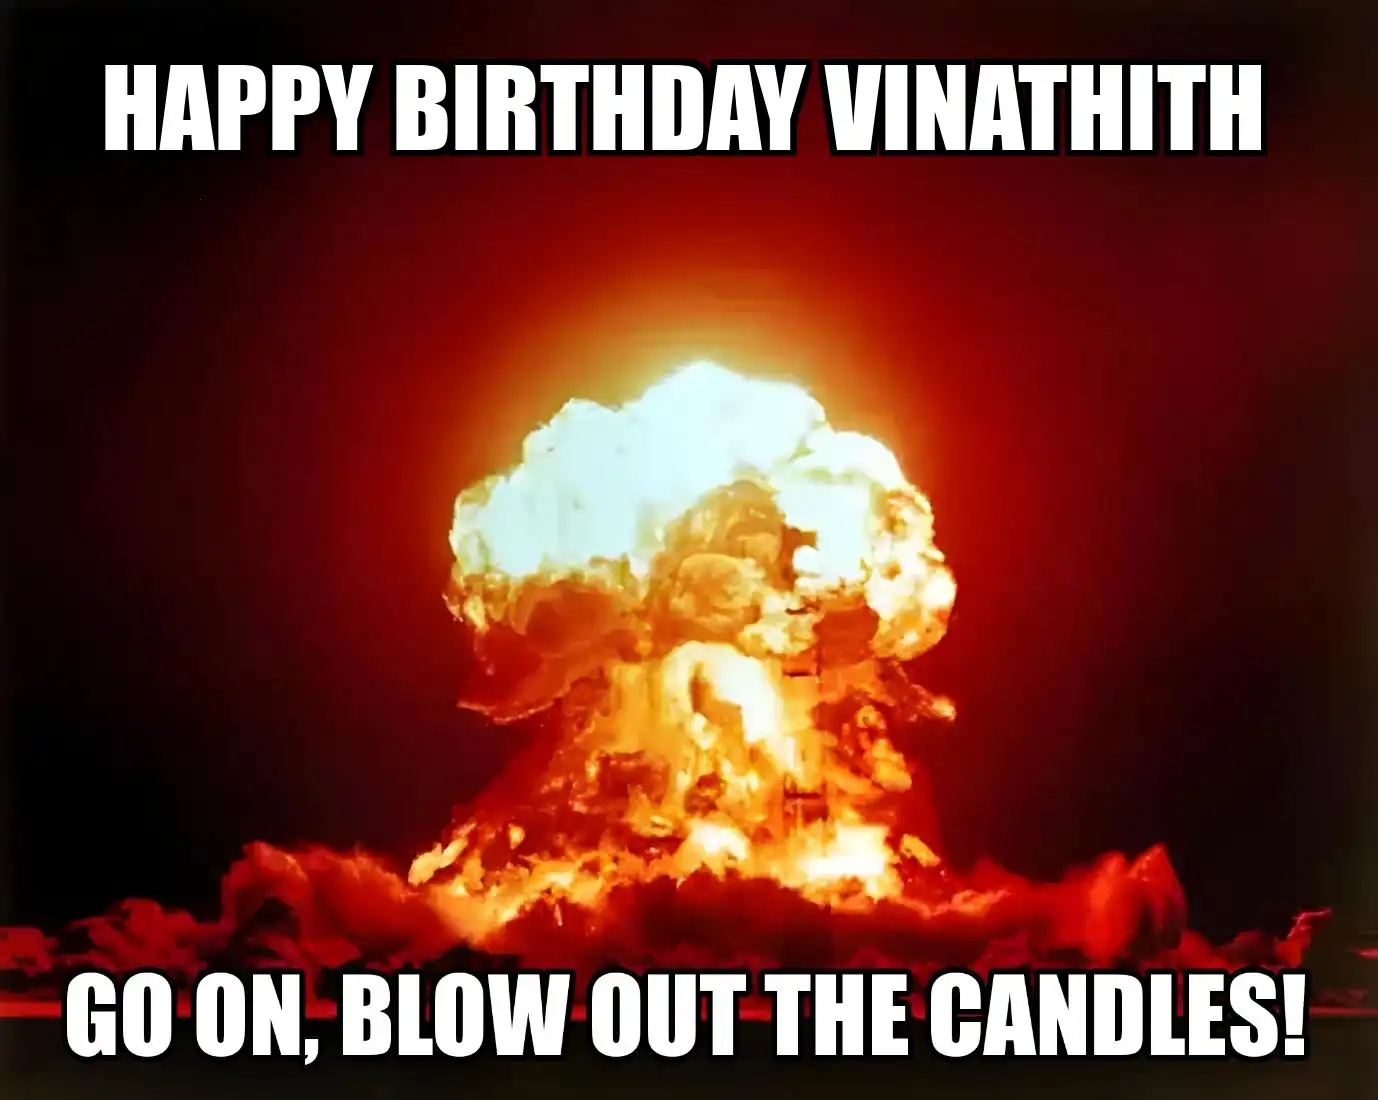 Happy Birthday Vinathith Go On Blow Out The Candles Meme